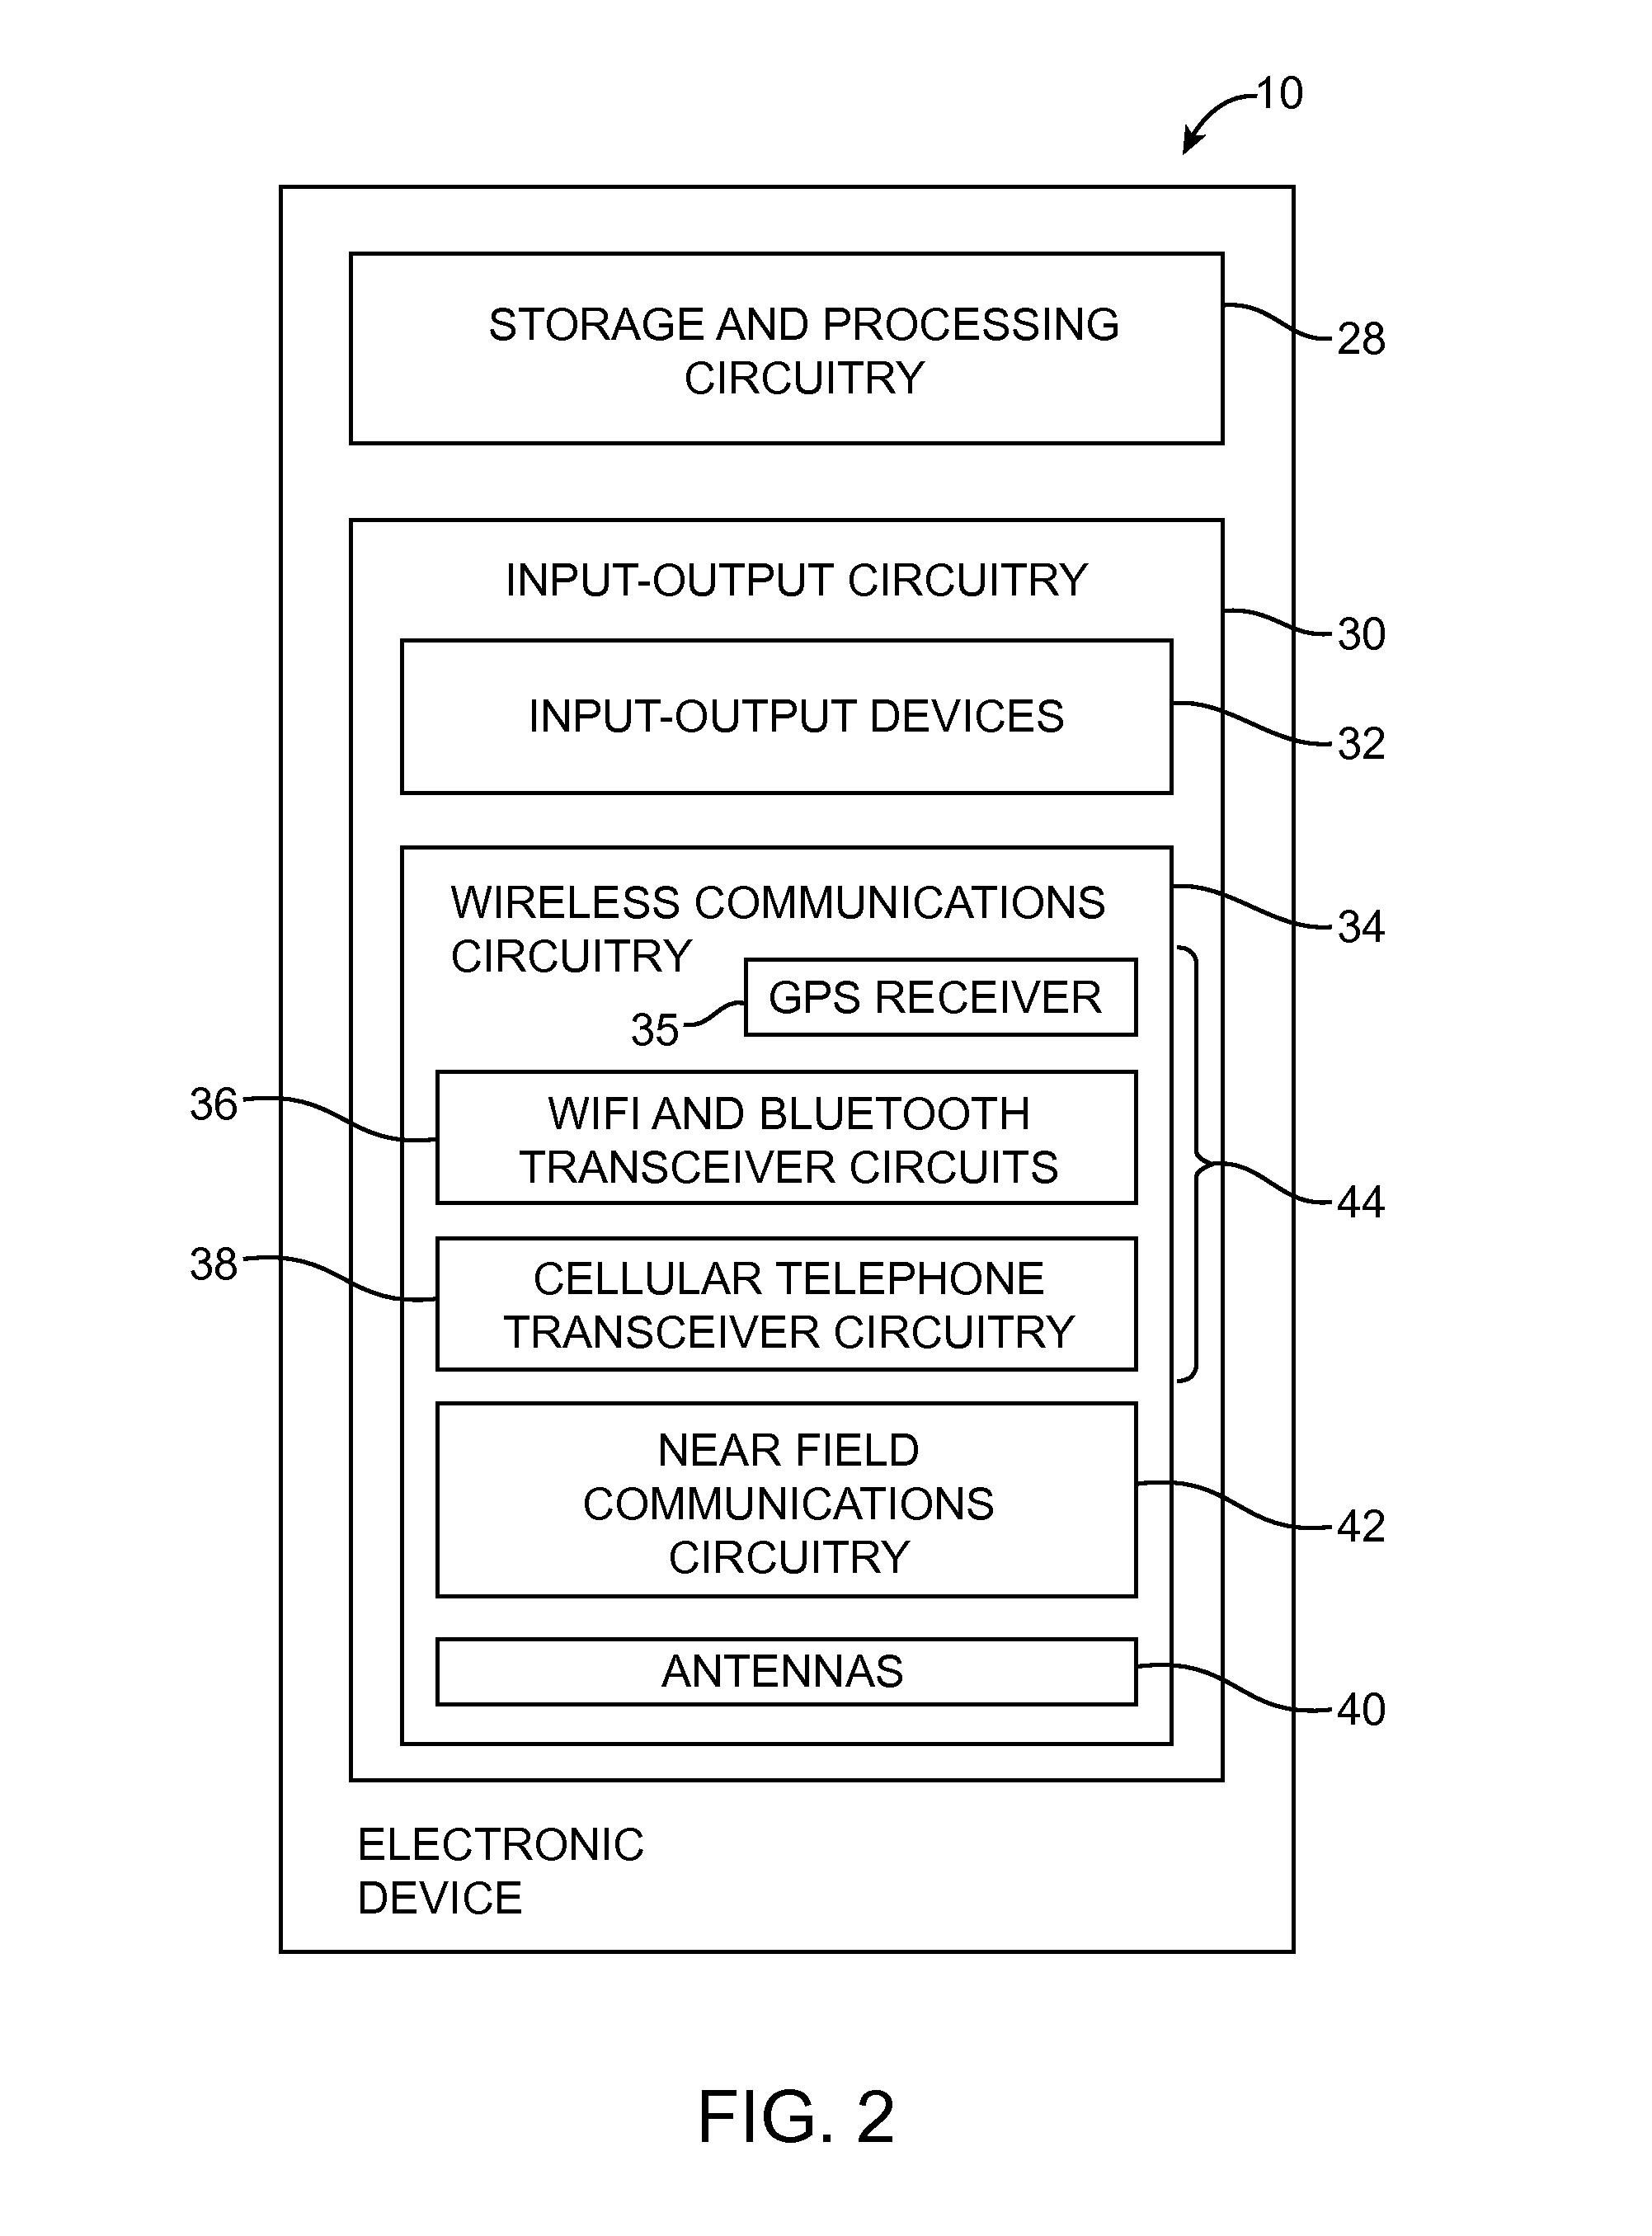 Shared Antenna Structures for Near-Field Communications and Non-Near-Field Communications Circuitry